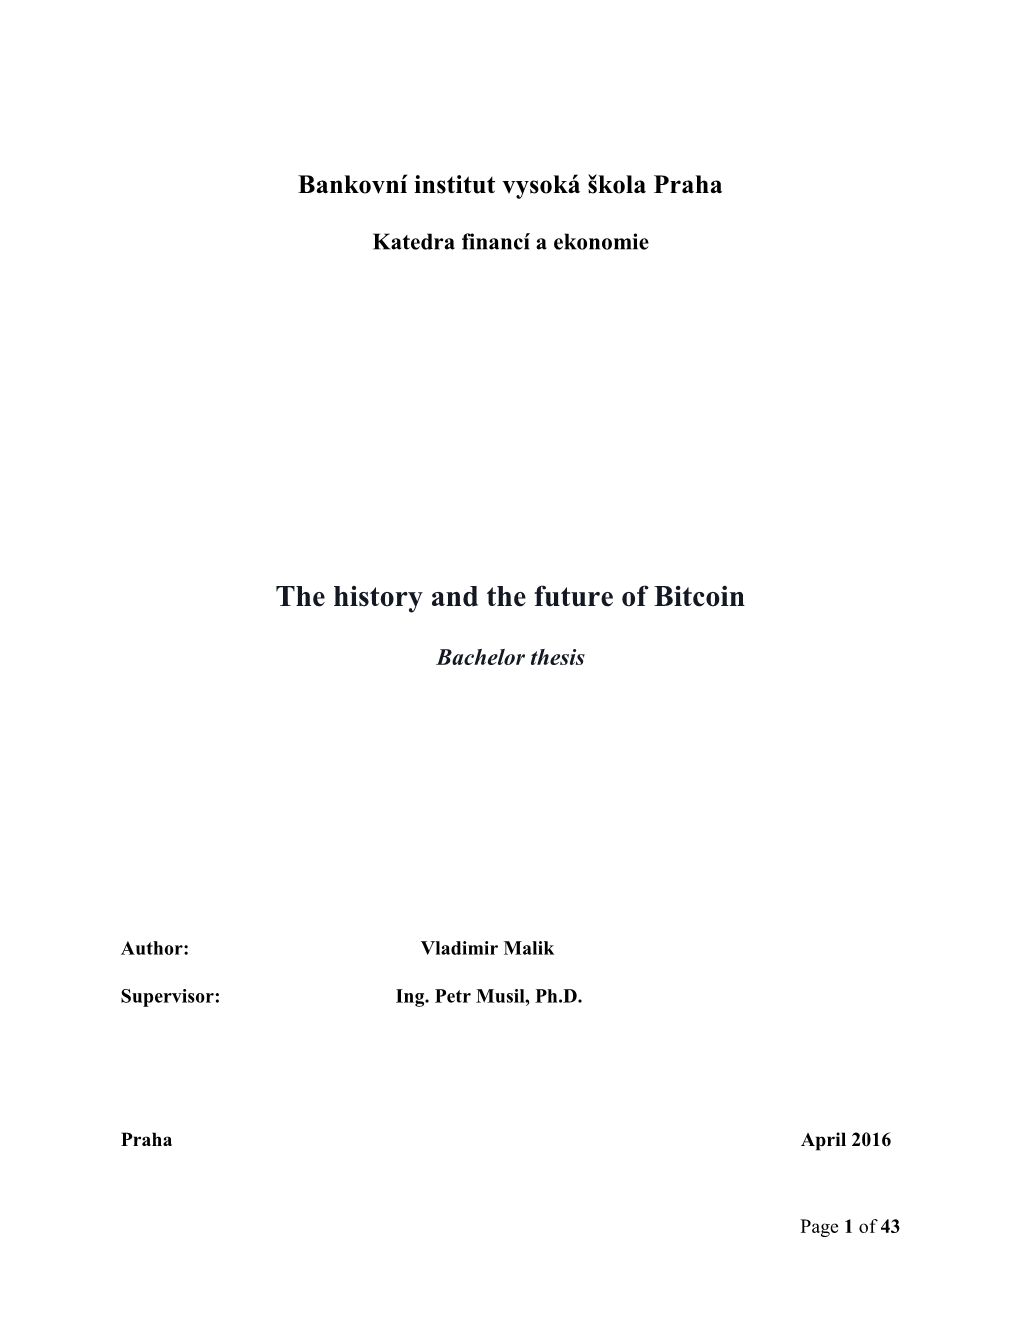 The History and the Future of Bitcoin